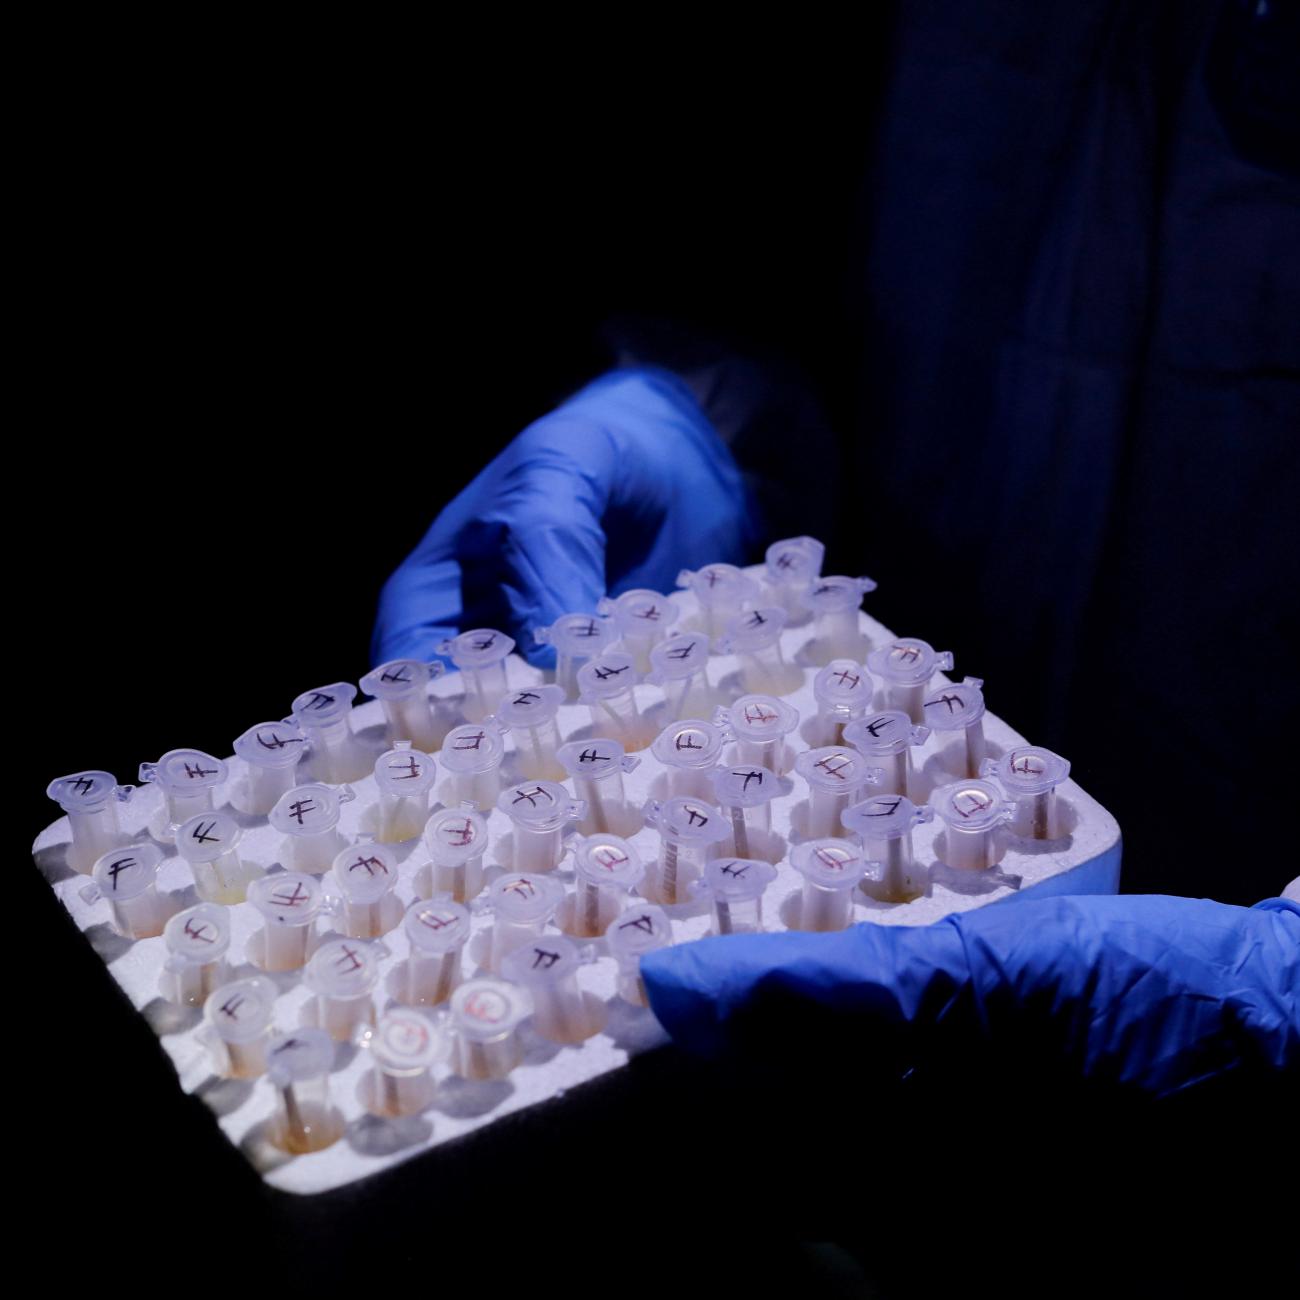 A member of a research team investigating emerging zoonotic diseases holds samples at a bat breeding shed, at Accra Zoo in Accra, Ghana, August 19, 2022. 